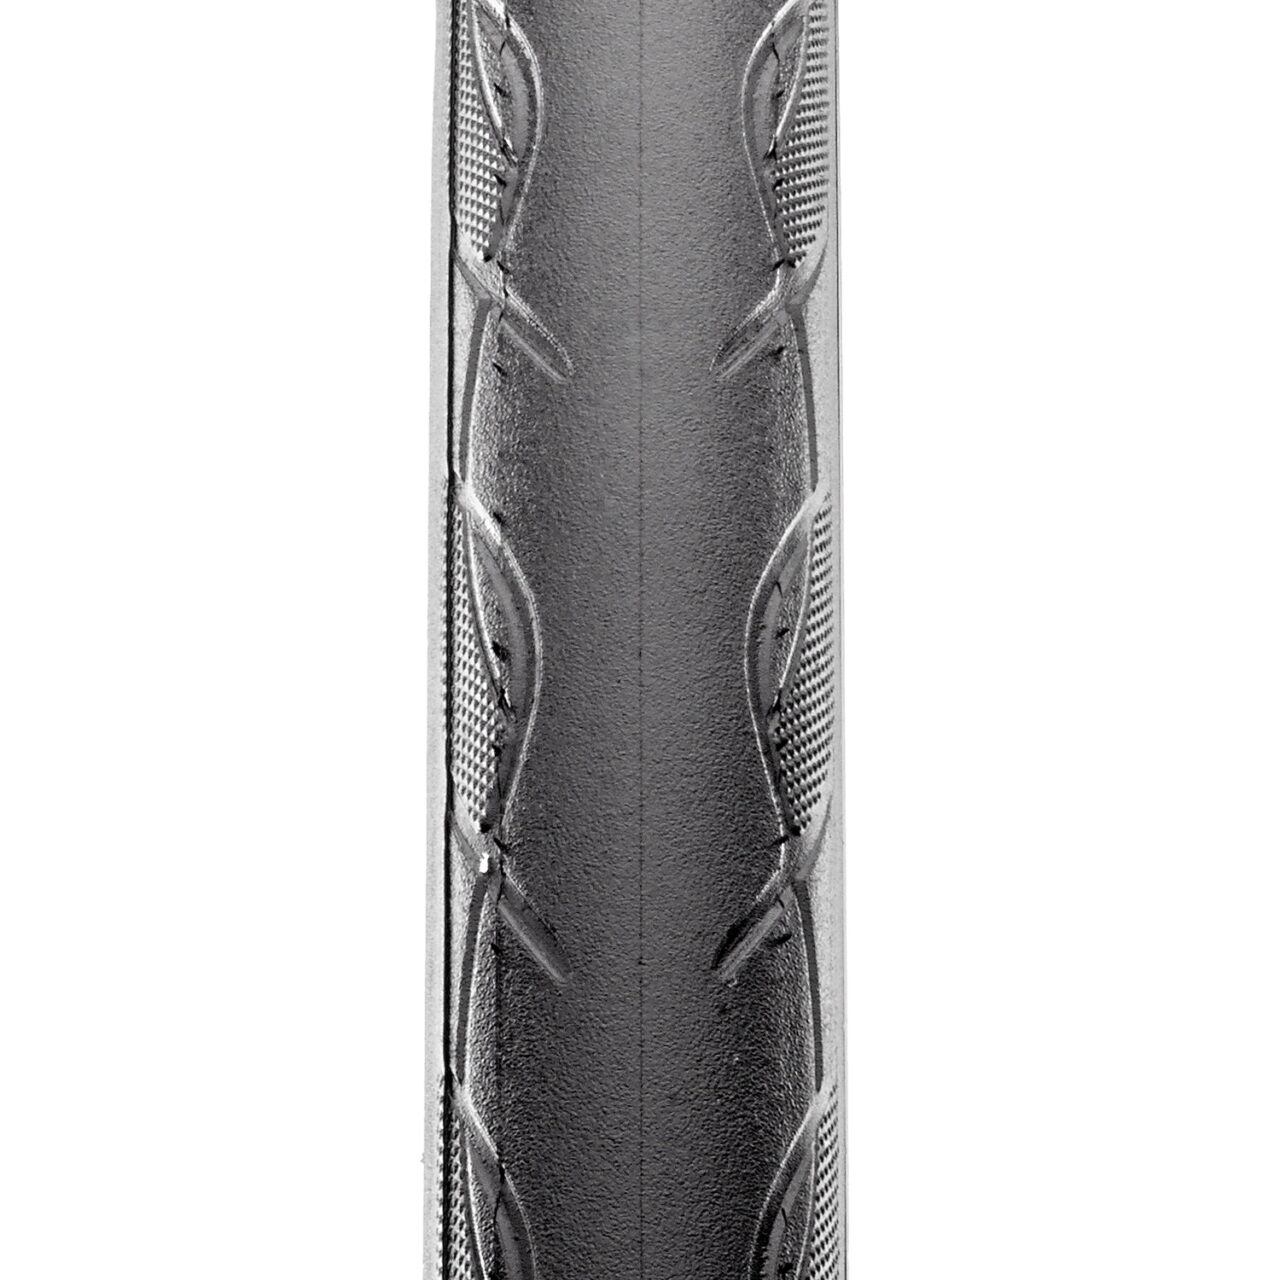 Close-up of Maxxis High Road Gen 1 bicycle tire tread